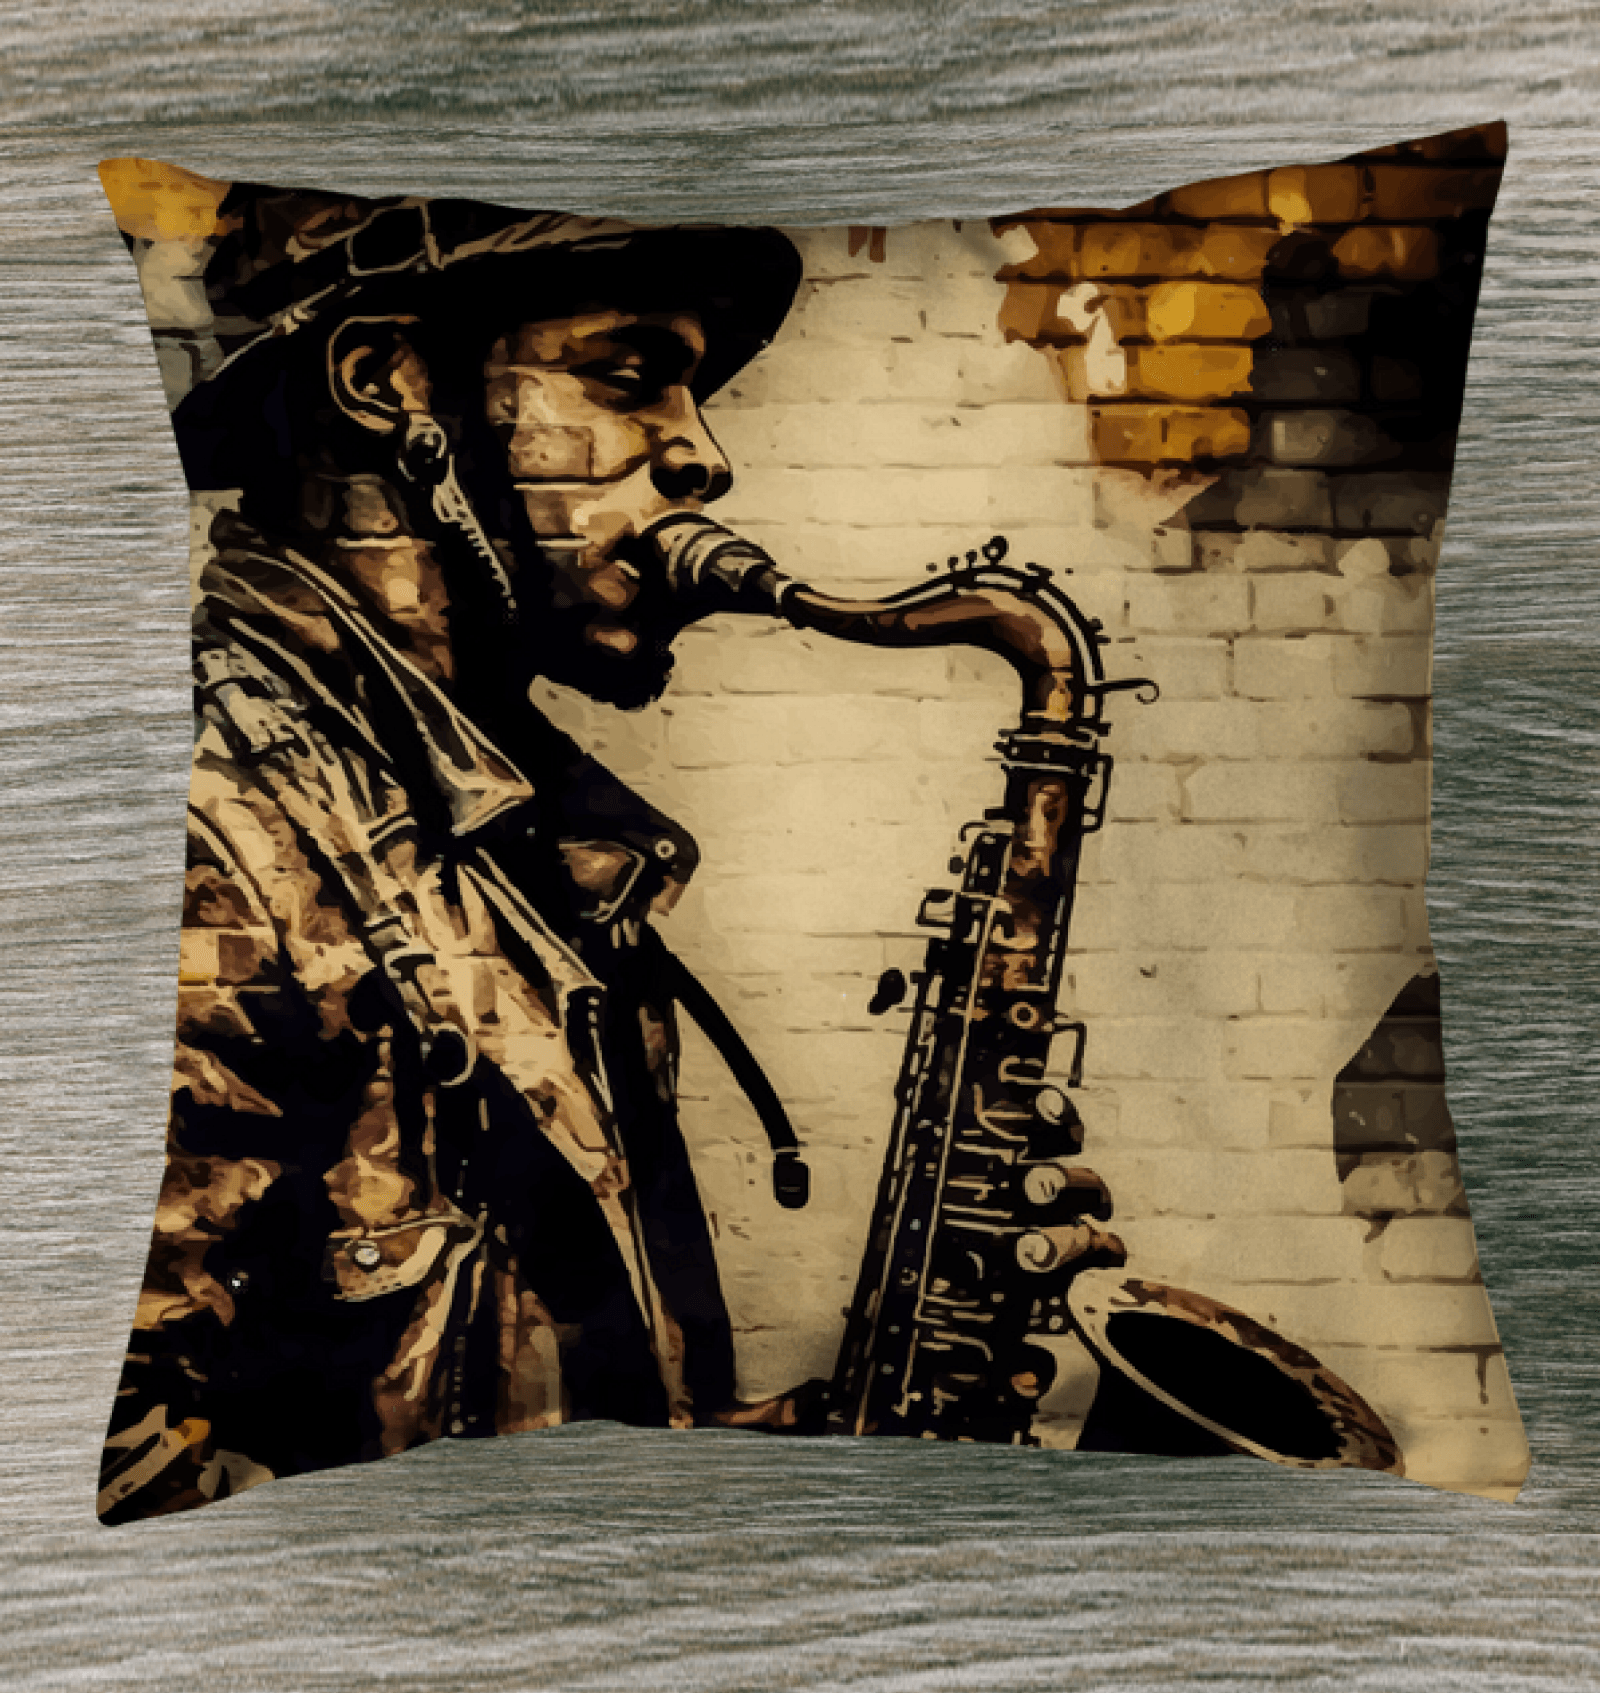 Blowin' On The Horn Outdoor Pillow - Beyond T-shirts